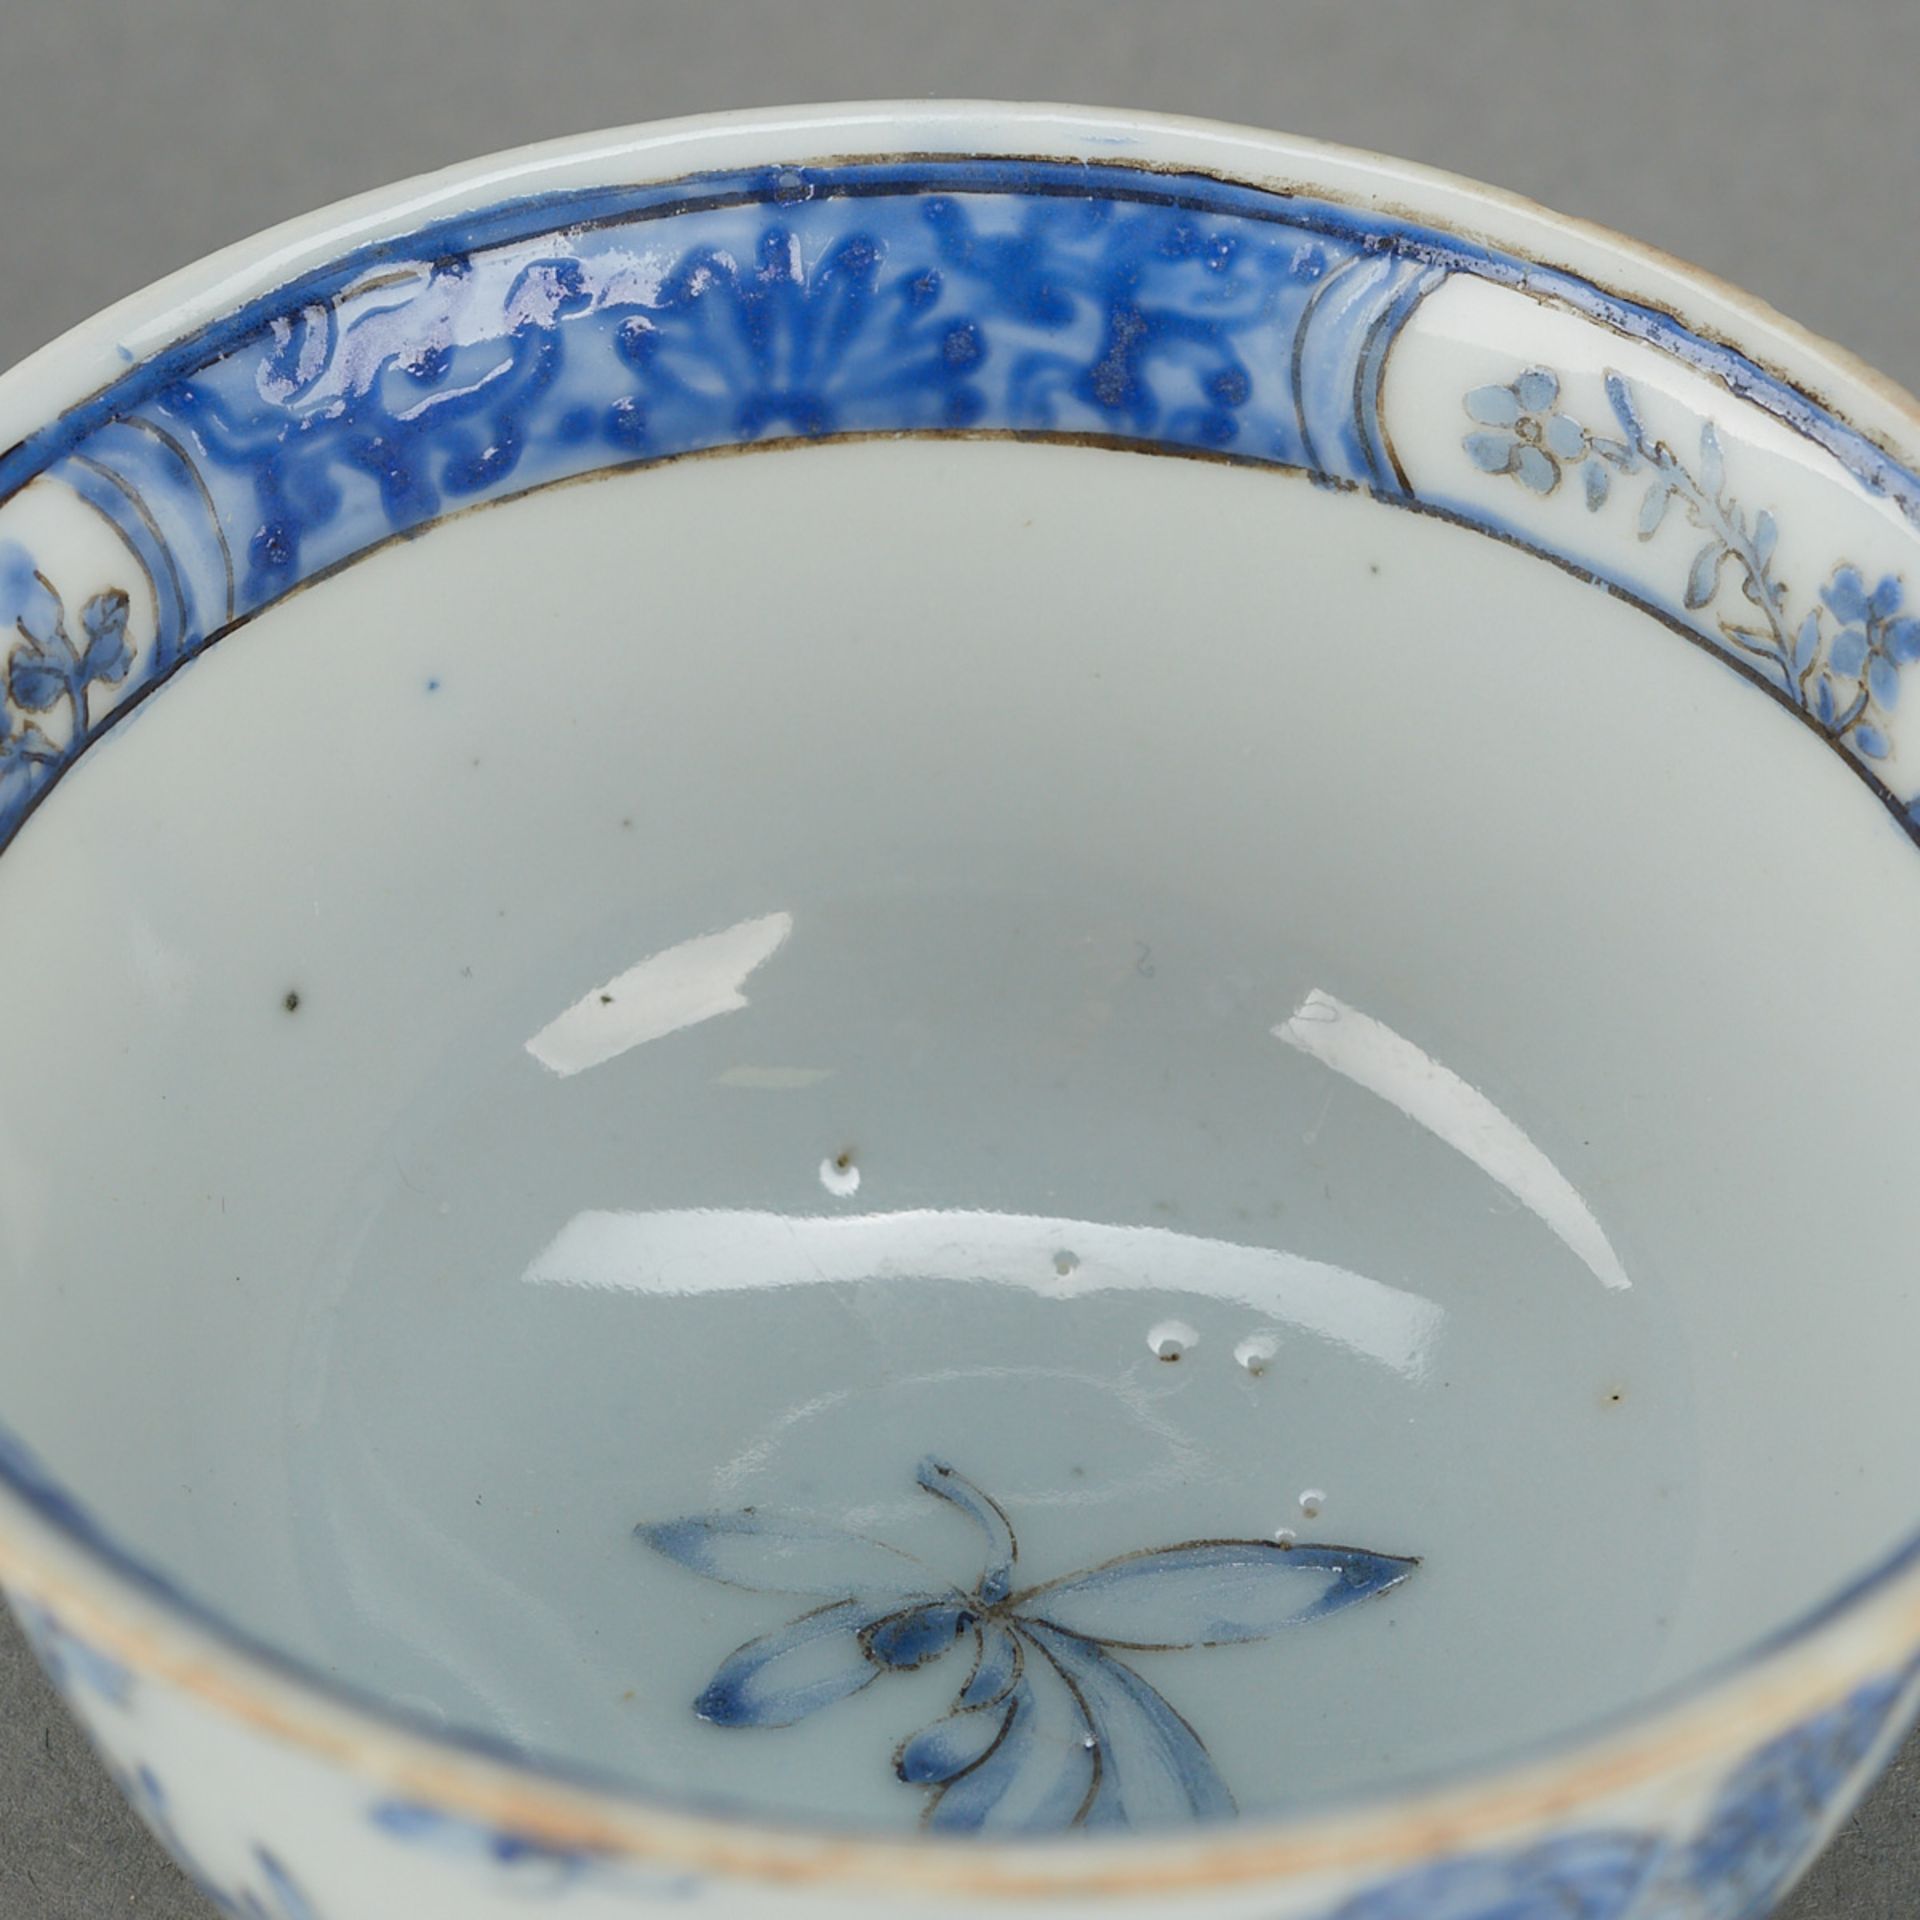 18th c. Chinese Porcelain Tea Bowl - Image 8 of 8